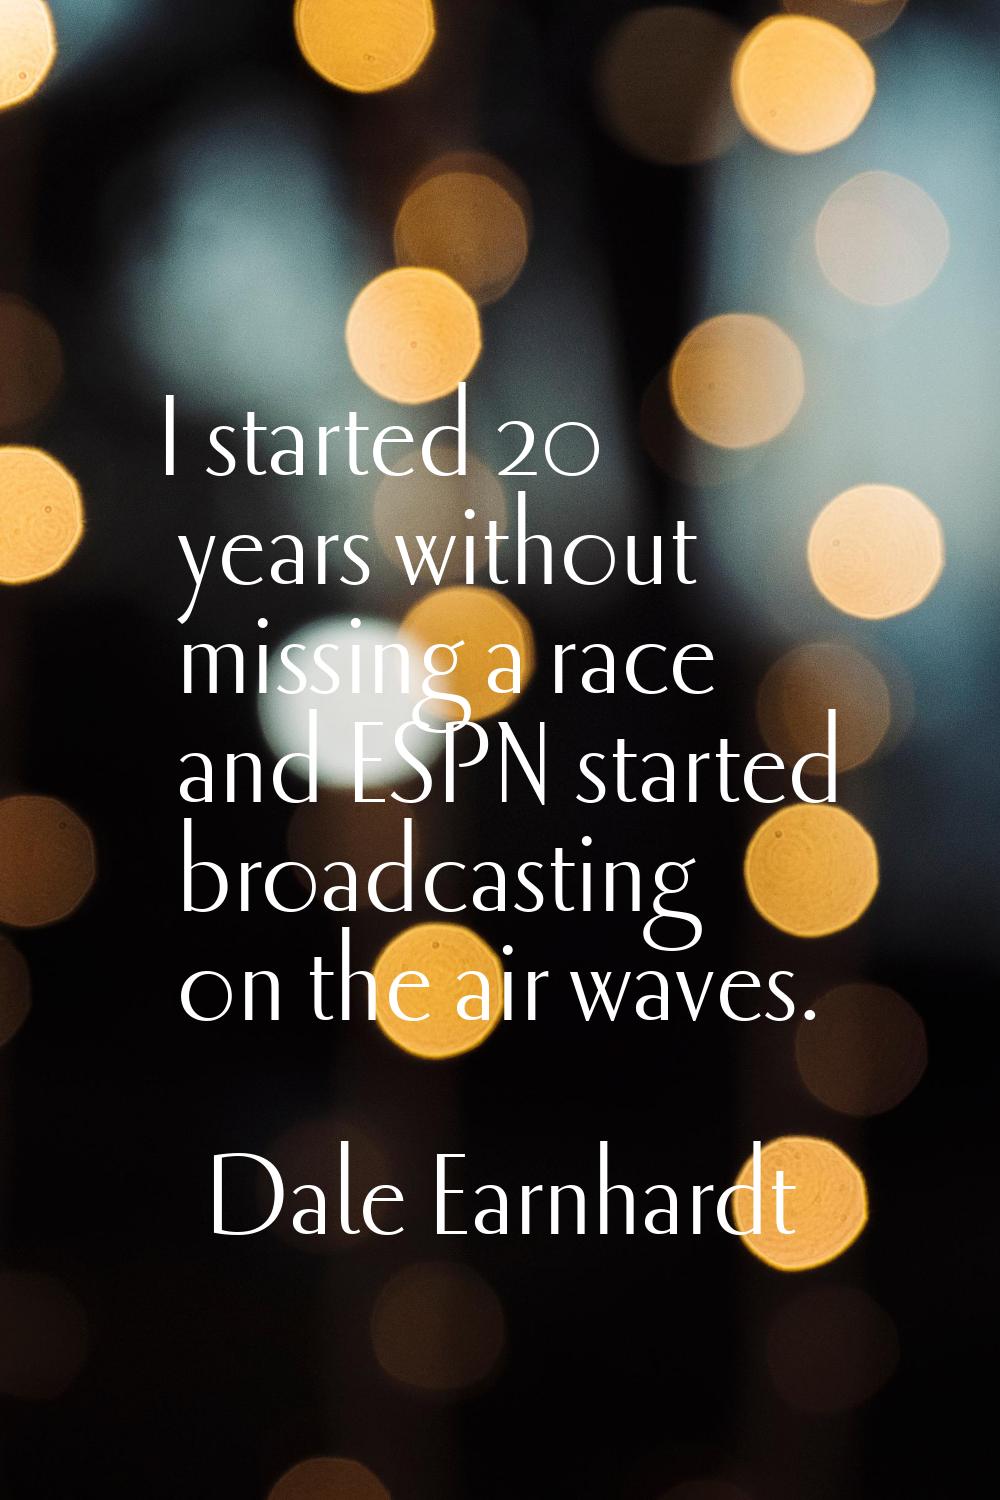 I started 20 years without missing a race and ESPN started broadcasting on the air waves.